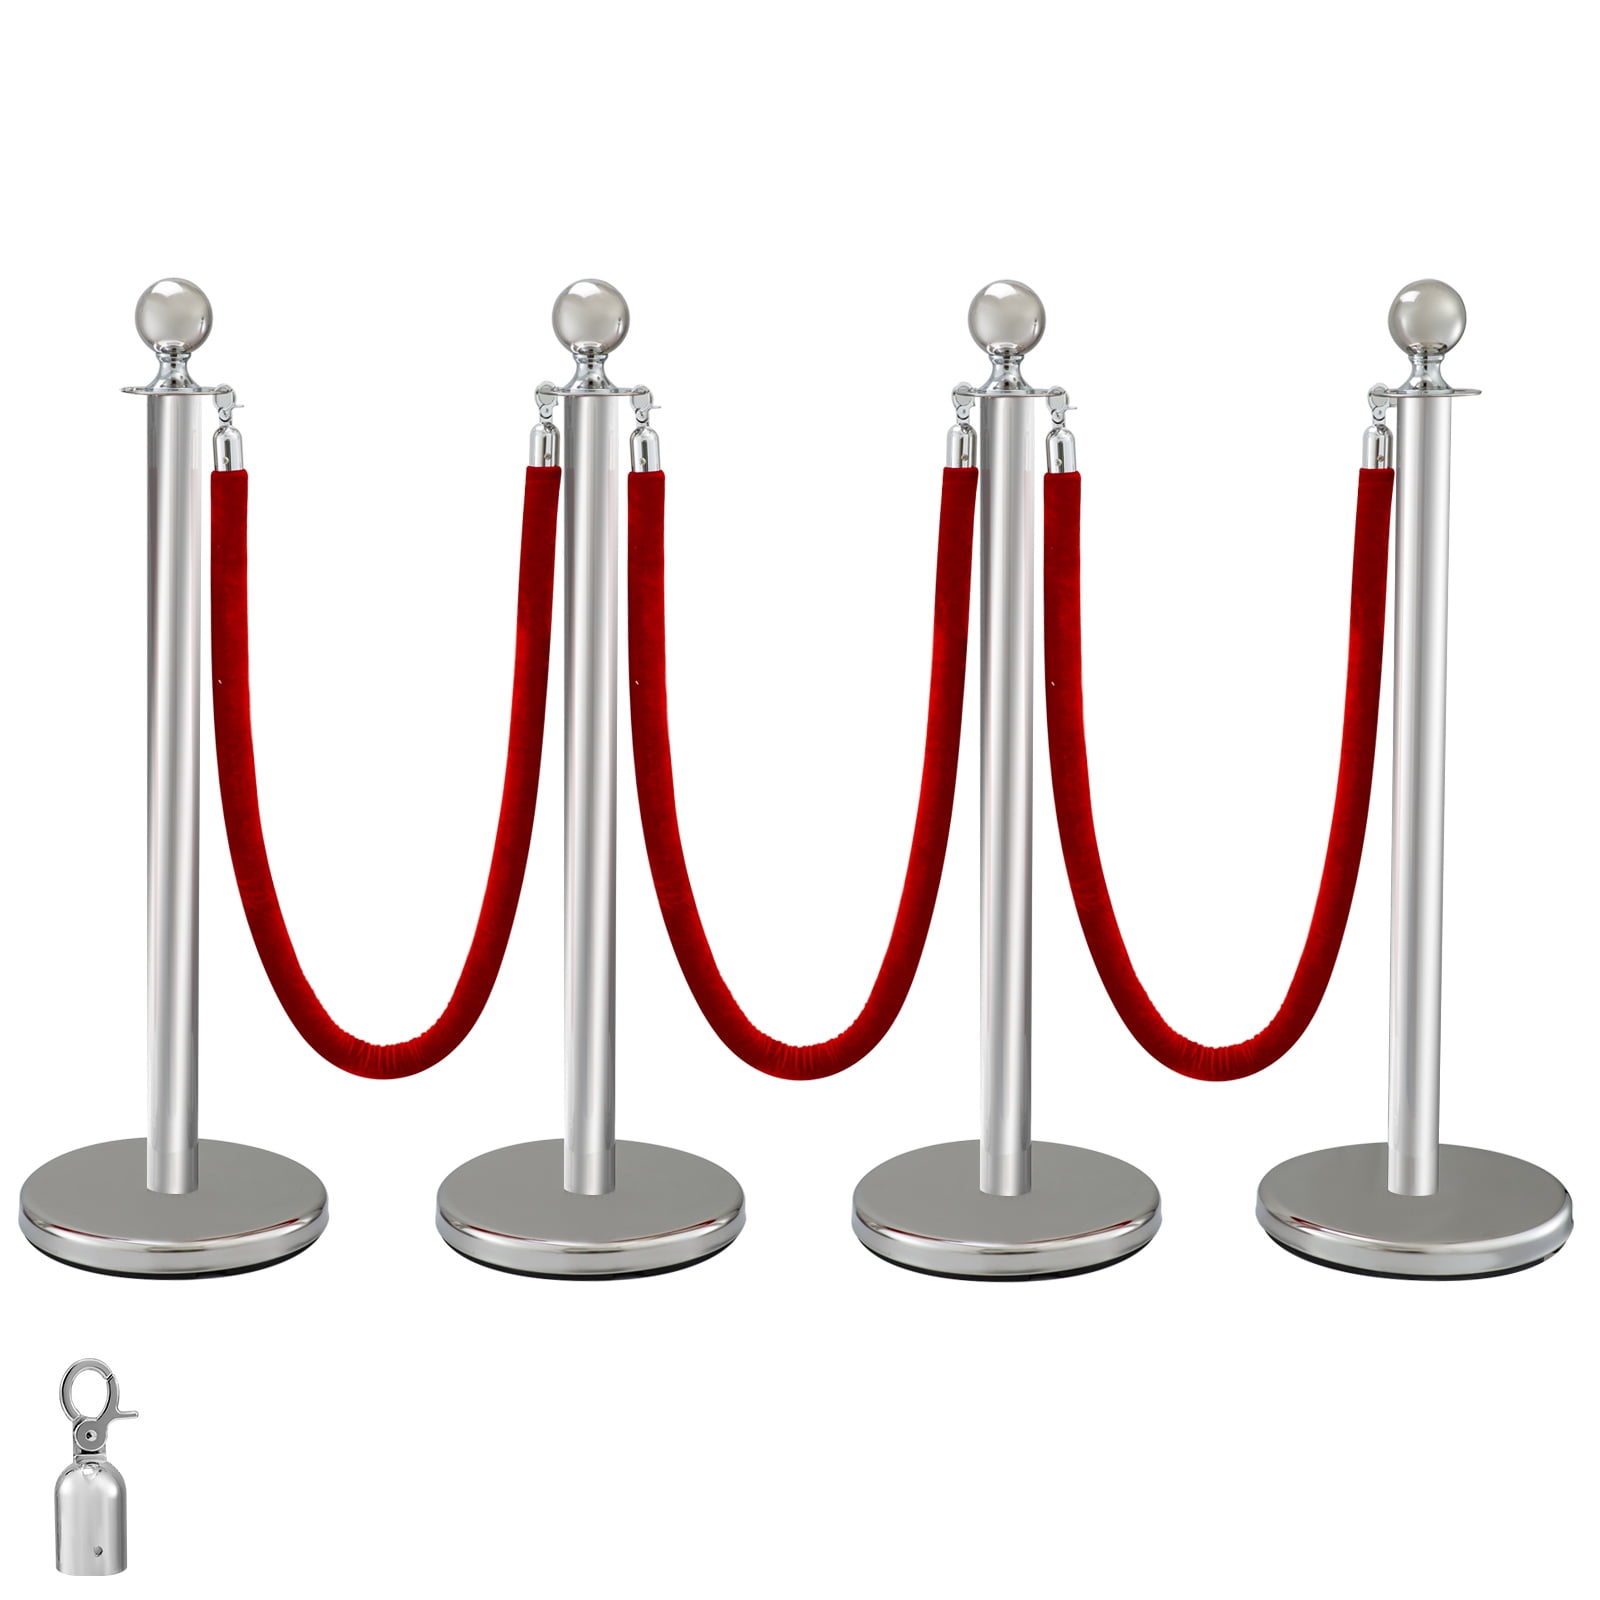 Red Queue Rope Barrier Velvet Rope Crowd Control with Silver Ends 1.5m 